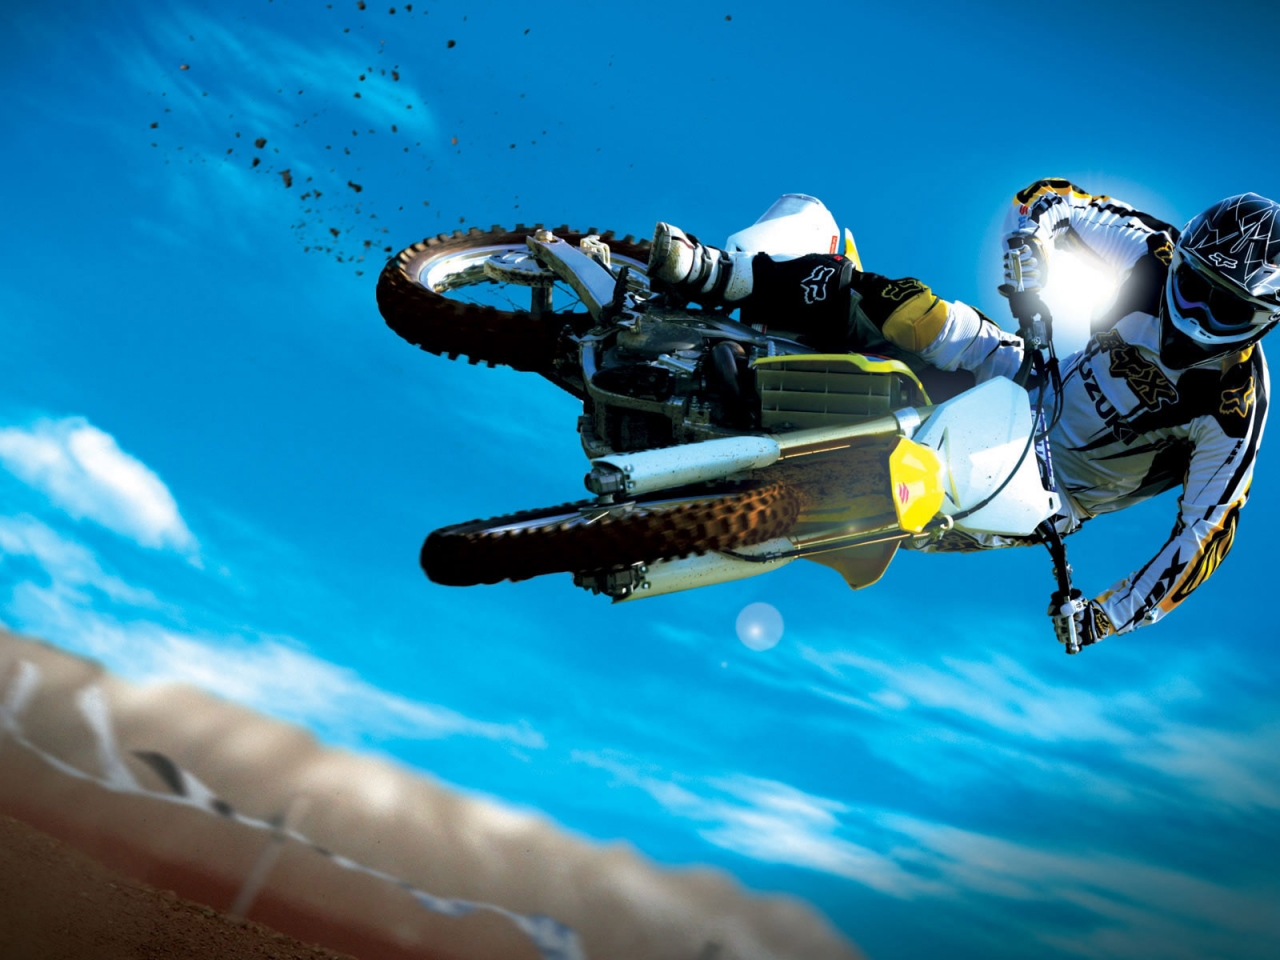 Extreme Moto Sport for 1280 x 960 resolution